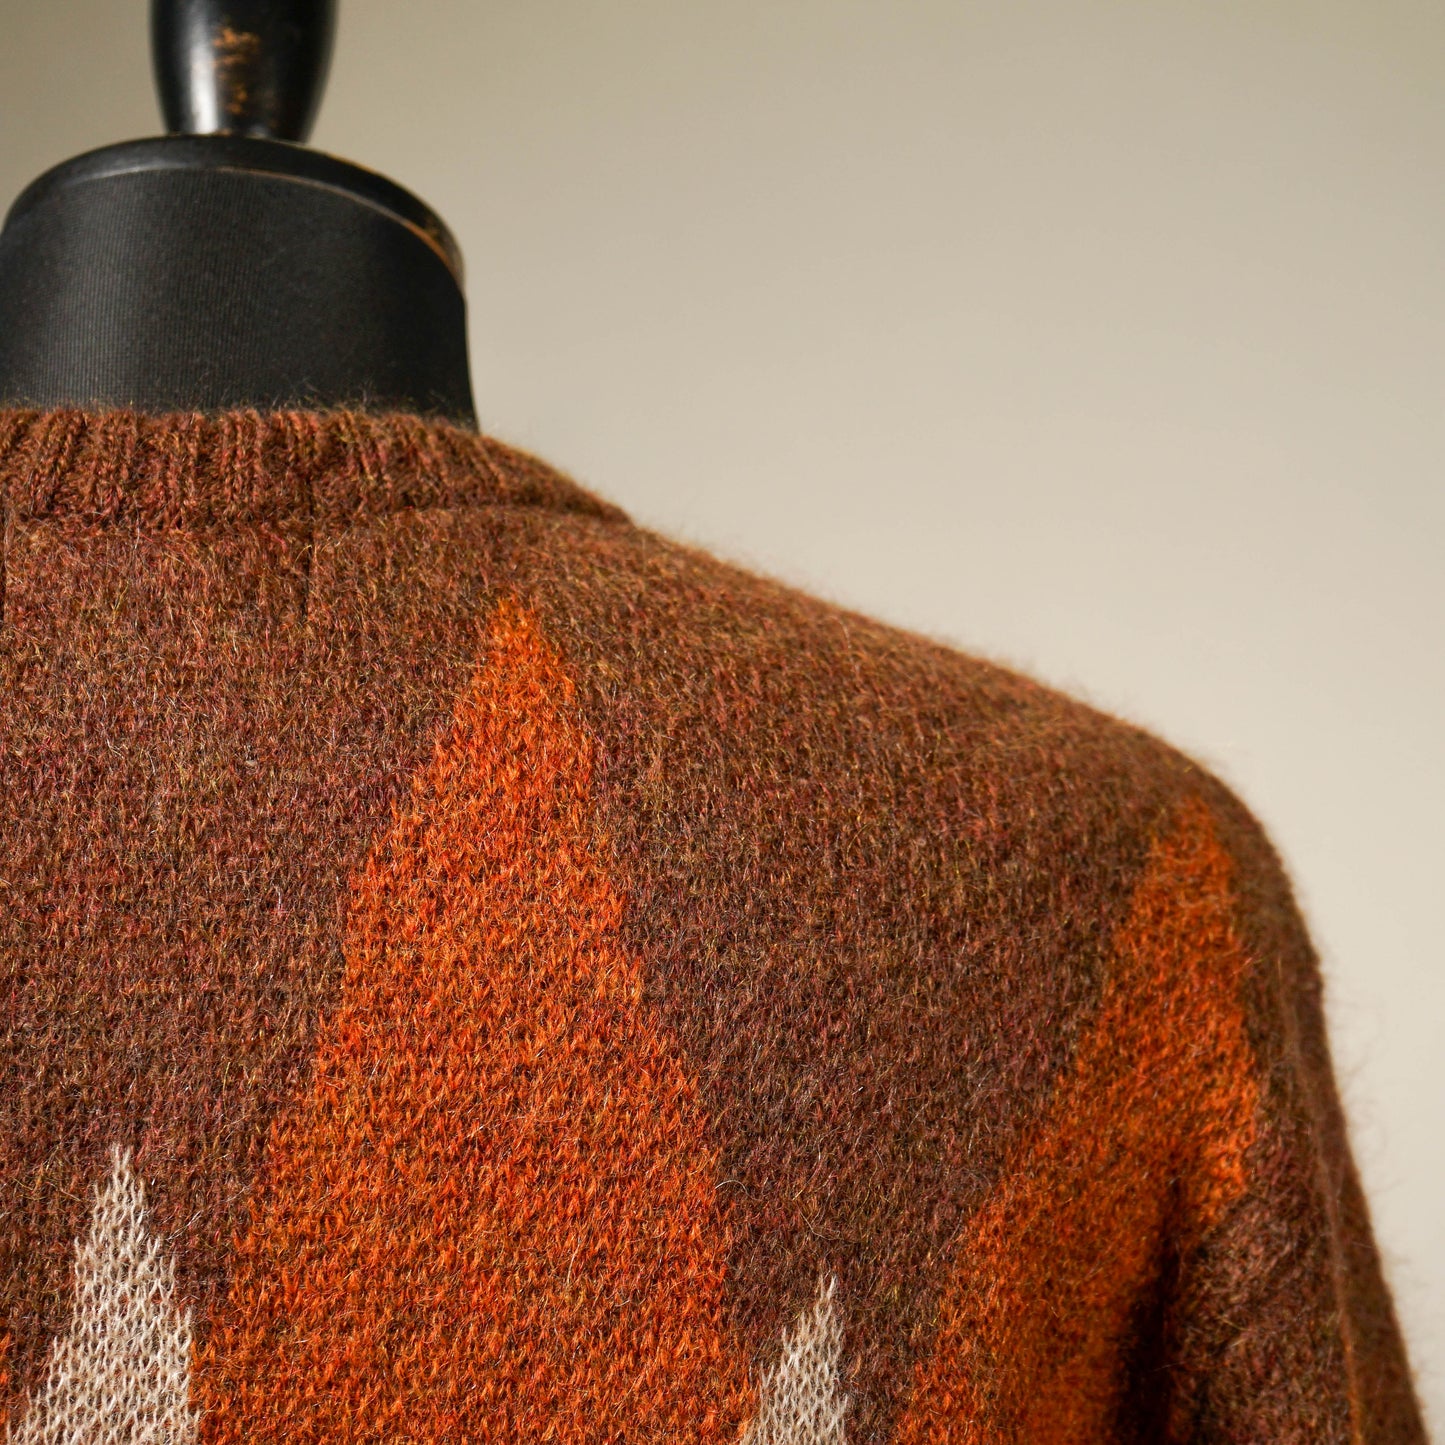 DEVIL'S HOLIDAY - MOHAIR CREW NECK SWEATER  / GSV-22-AW-19